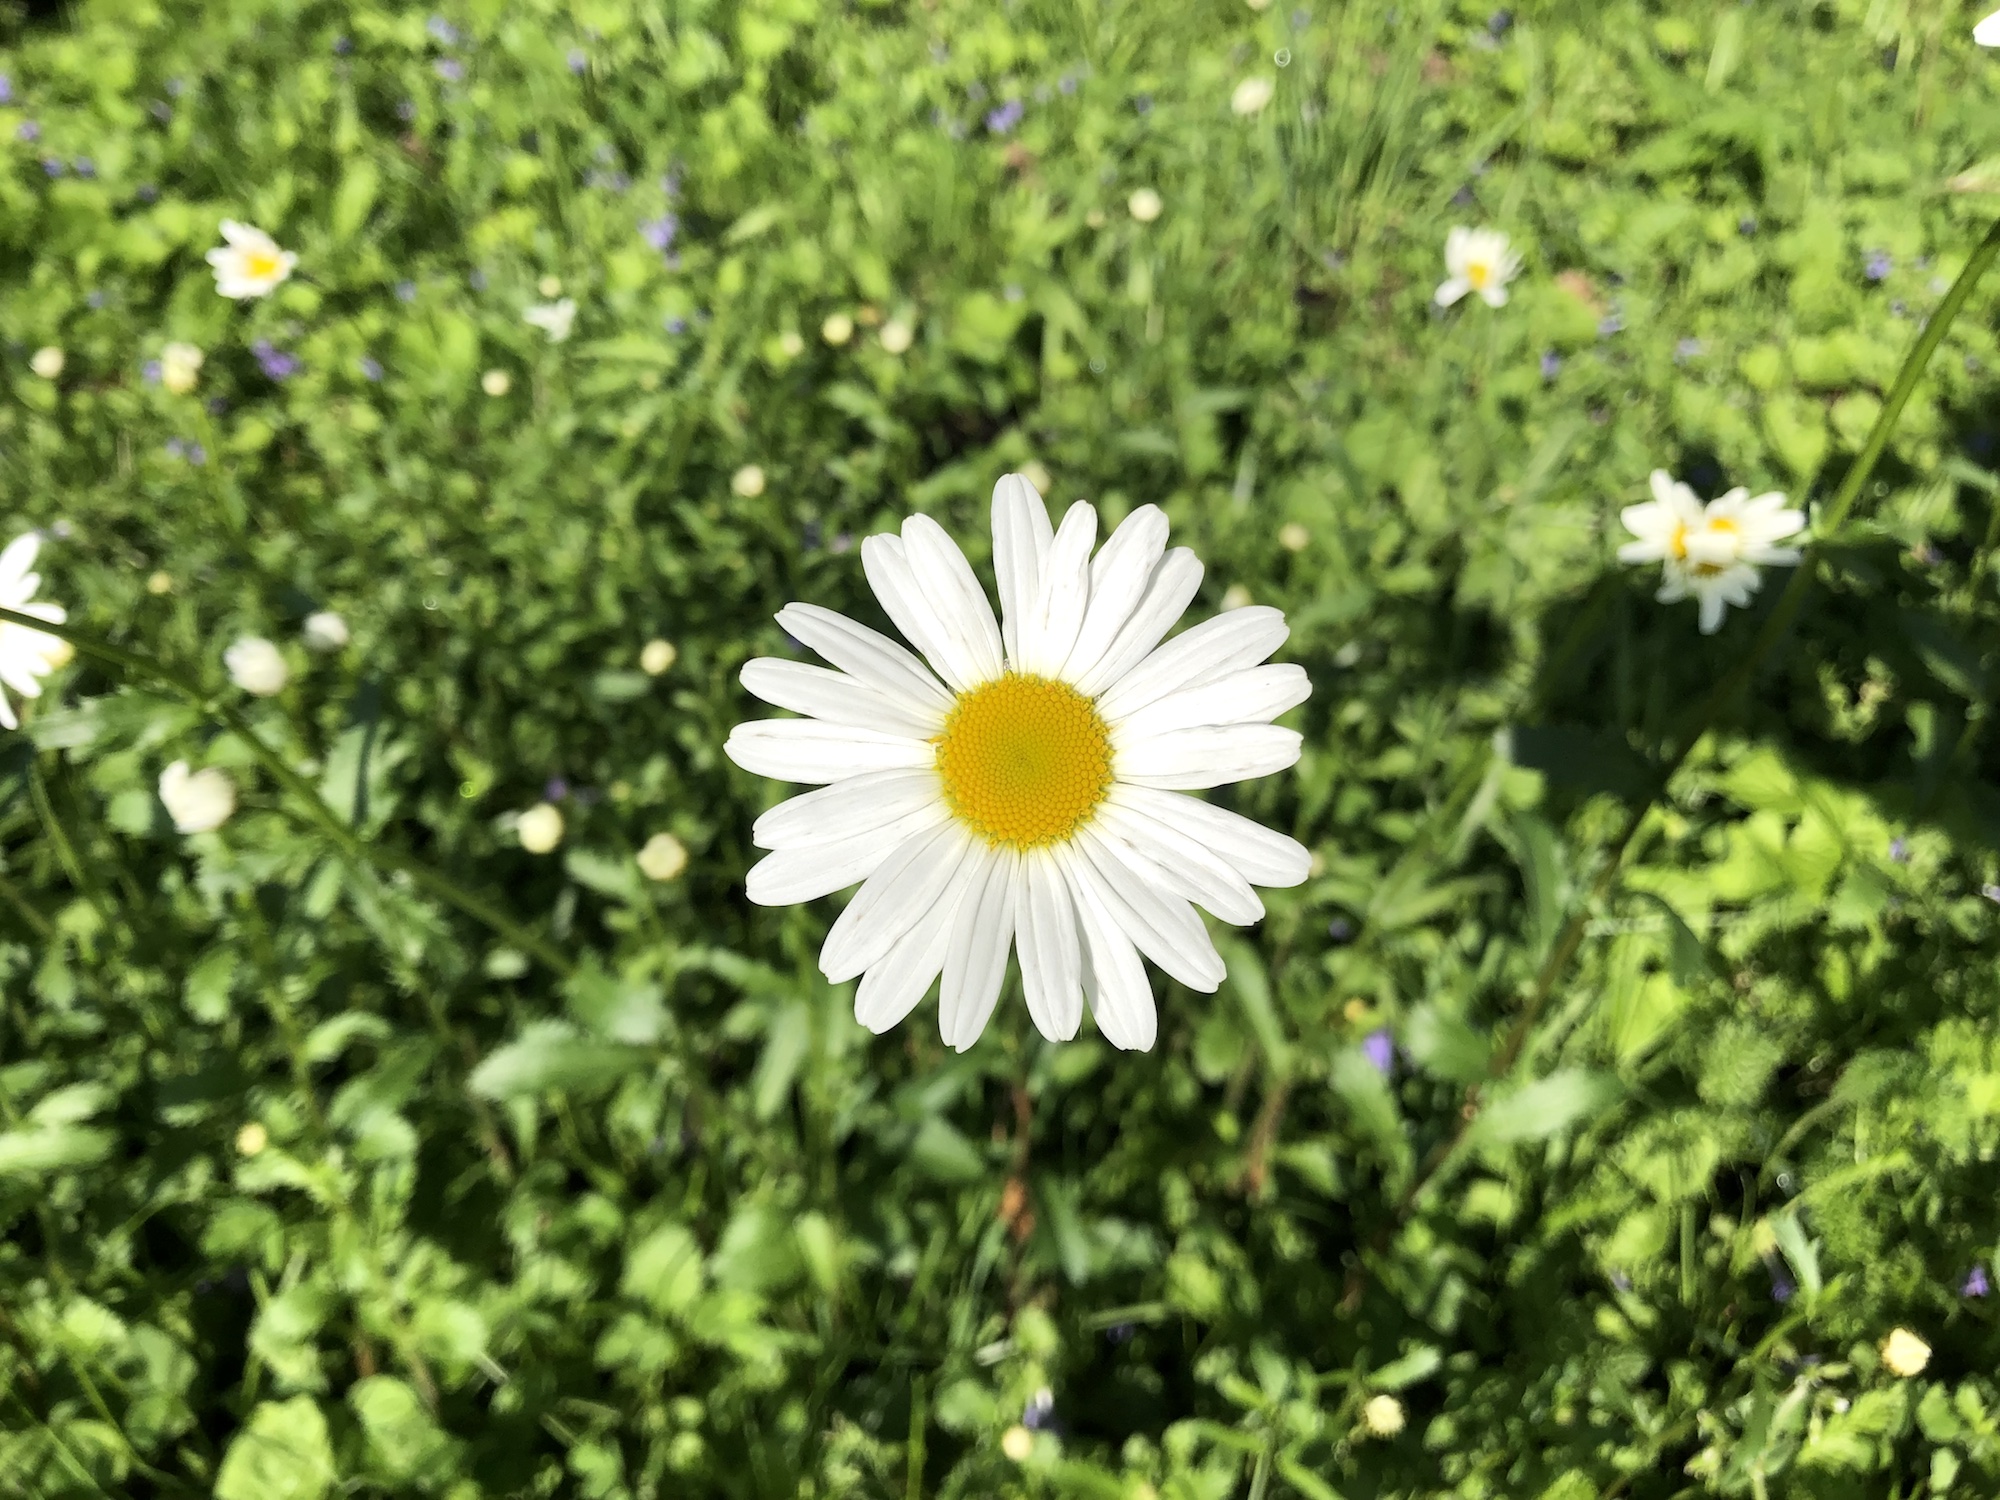 Ox-eye Daisy on bank of retaining pond on June 2, 2019.